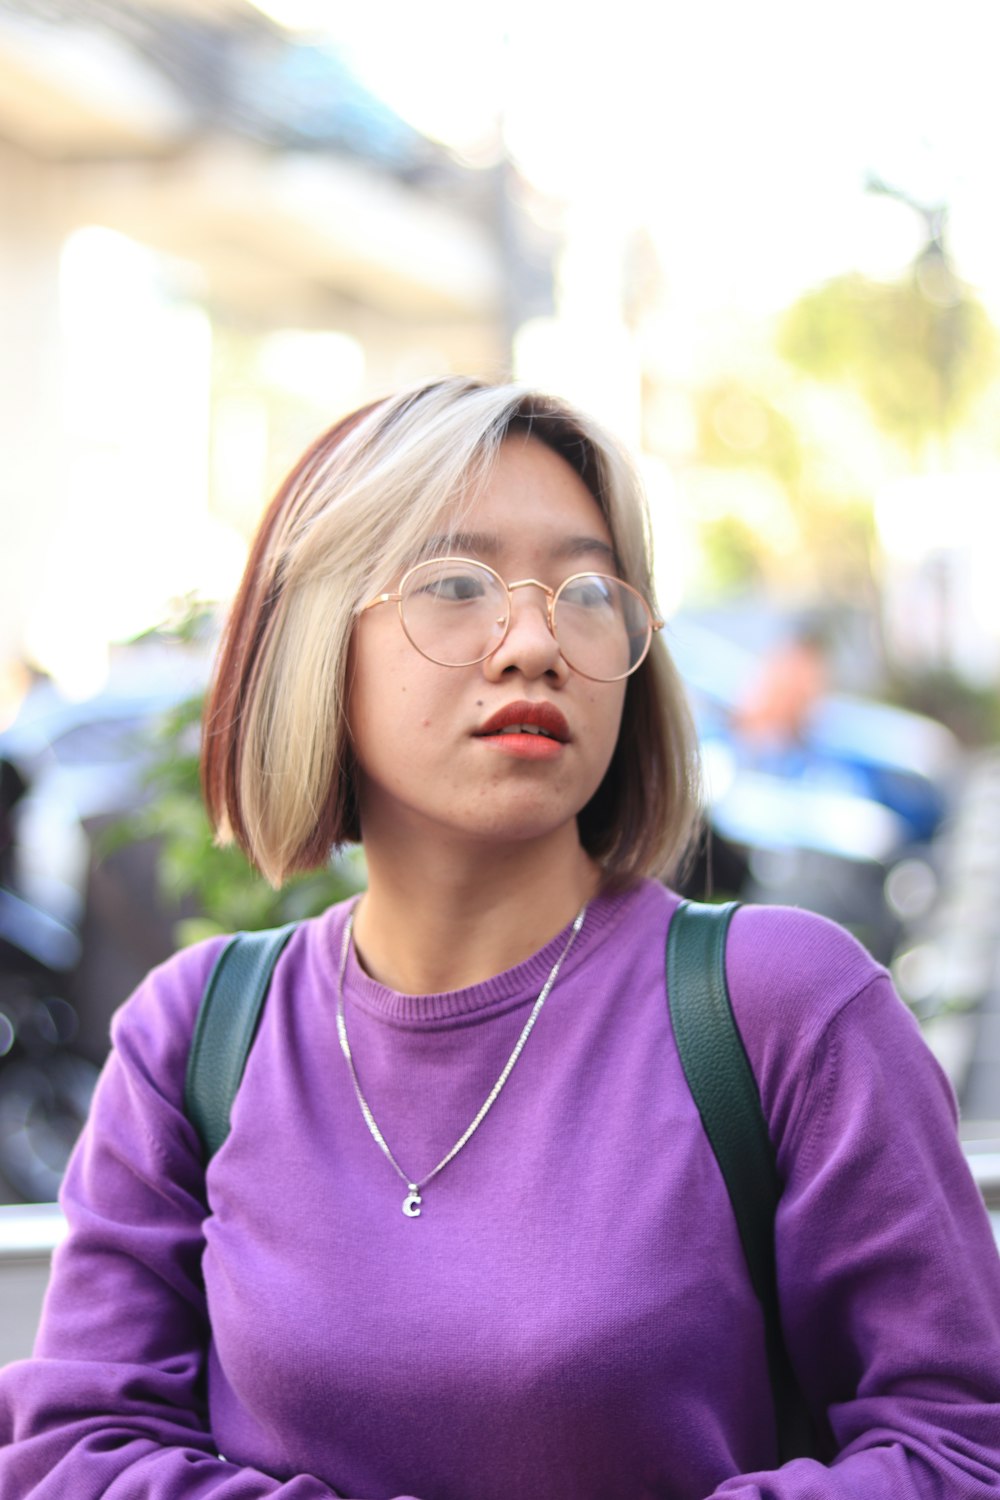 a woman with glasses and a purple shirt